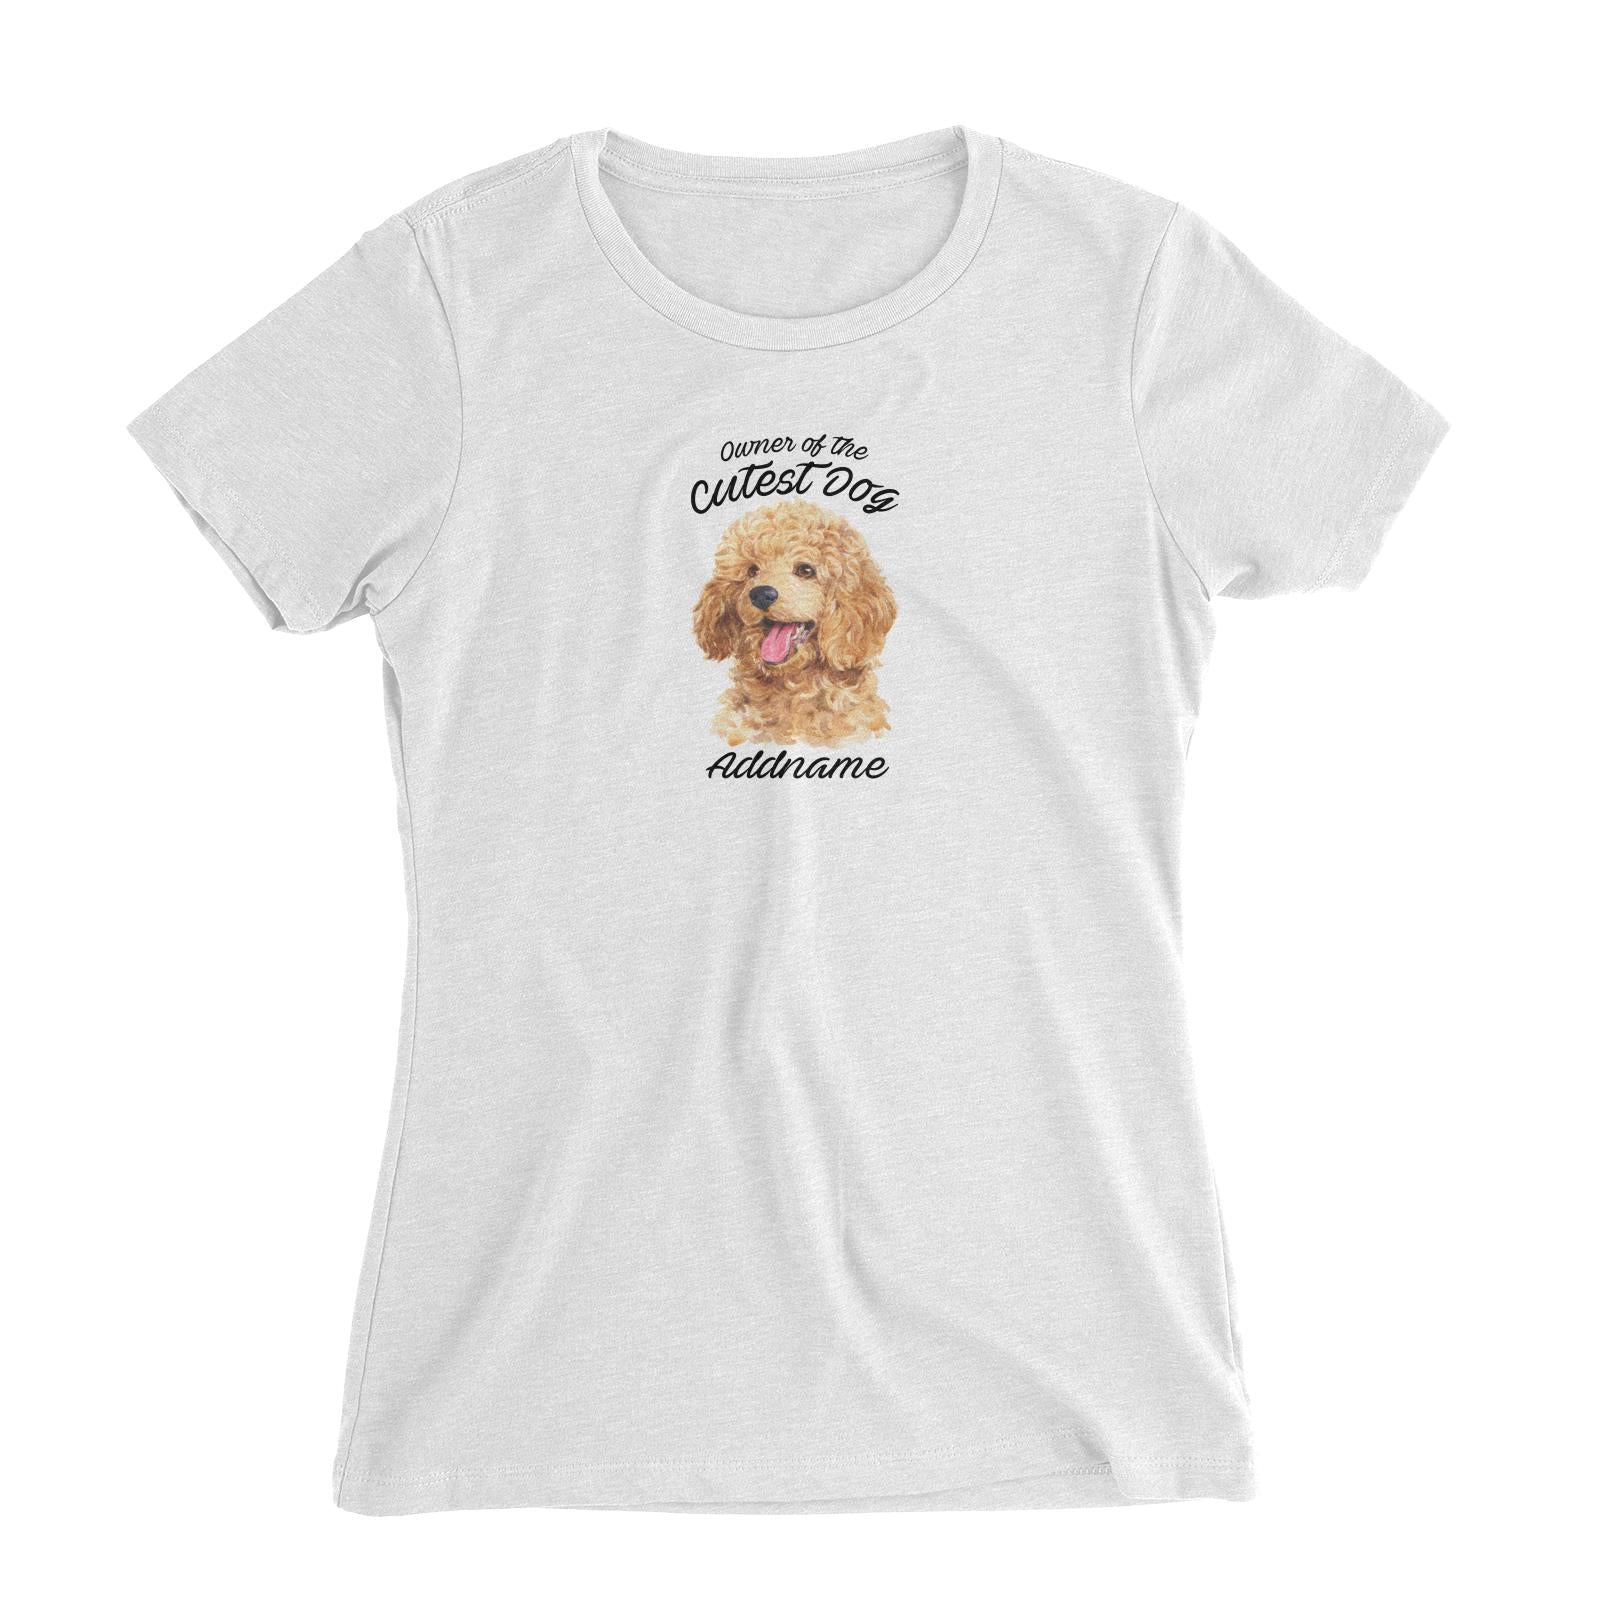 Watercolor Dog Owner Of The Cutest Dog Poodle Gold Addname Women's Slim Fit T-Shirt